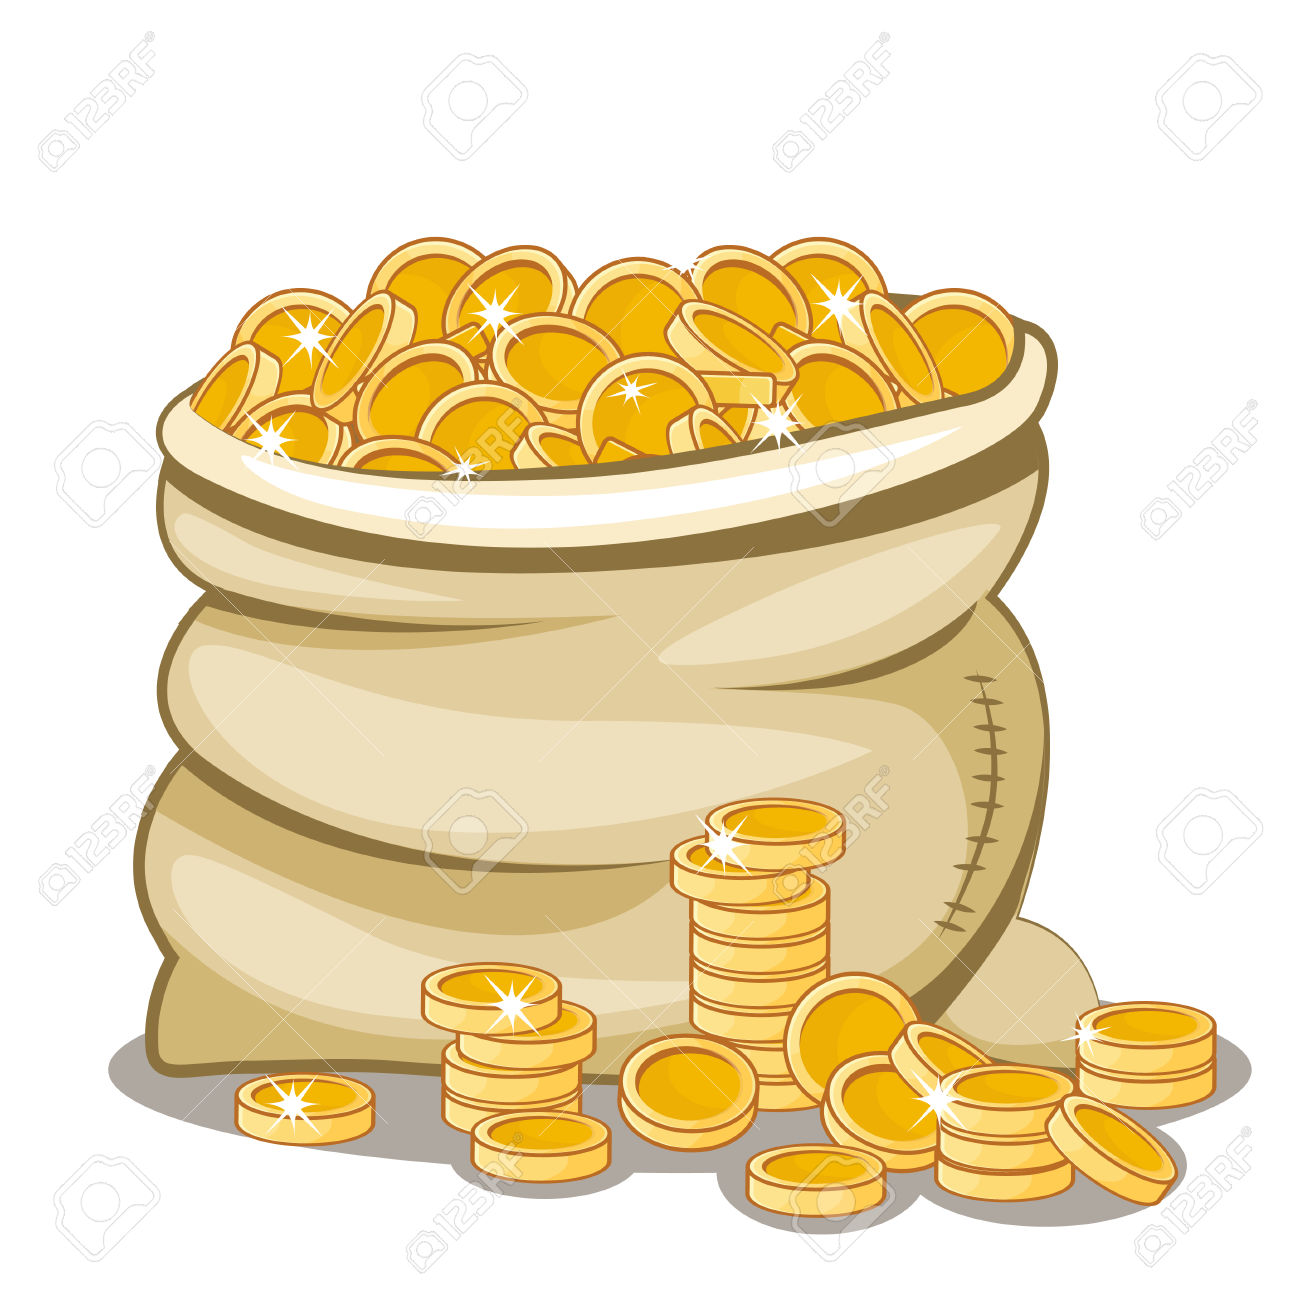 Gold Coin Image Clipart | Free download on ClipArtMag